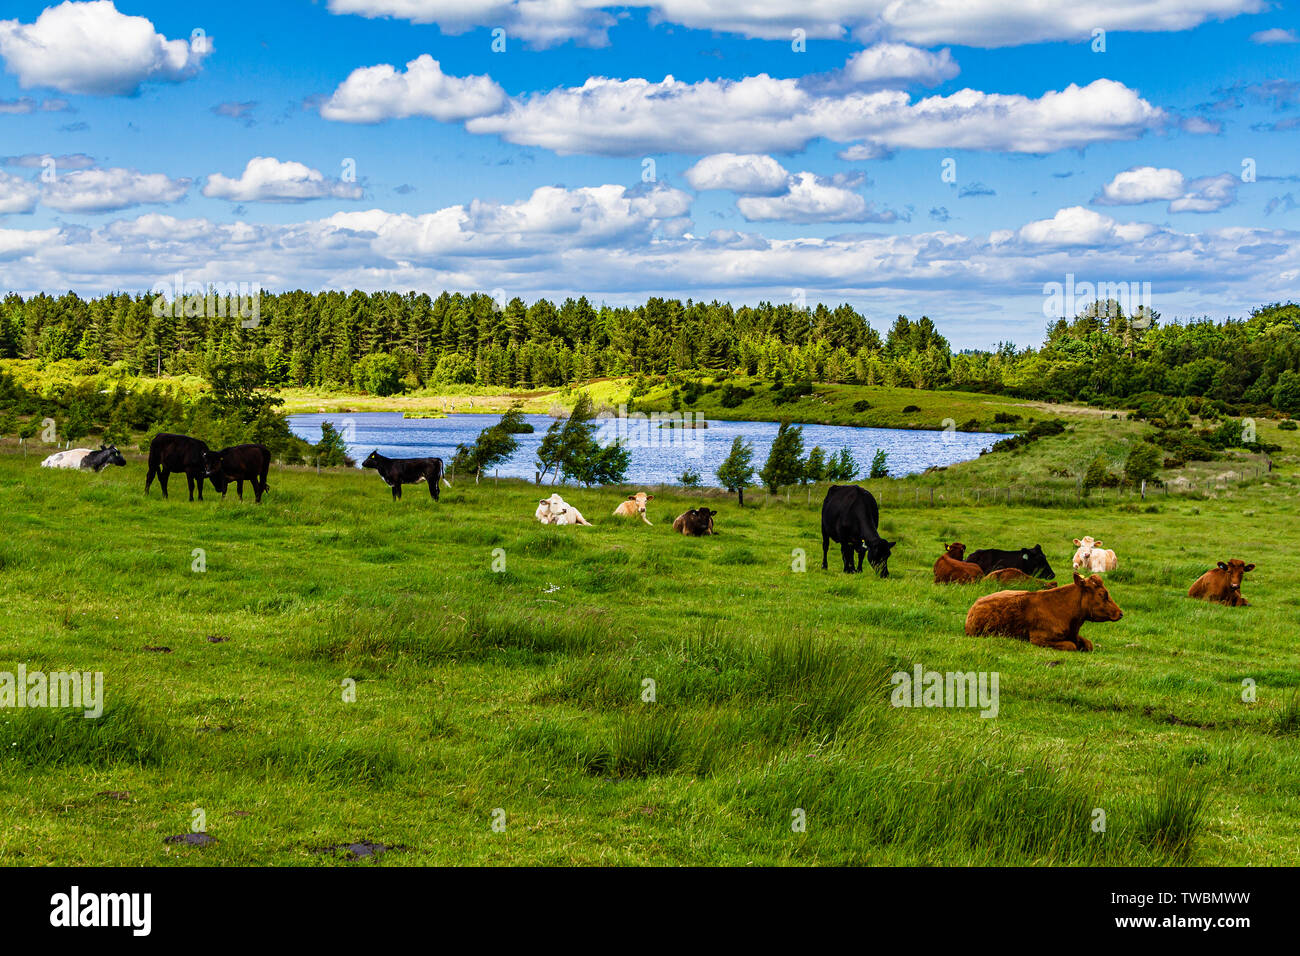 Cows in a grassy field with Holburn Lake nature reserve beyond. Holburn, Northumberland, UK. June 2019. Stock Photo